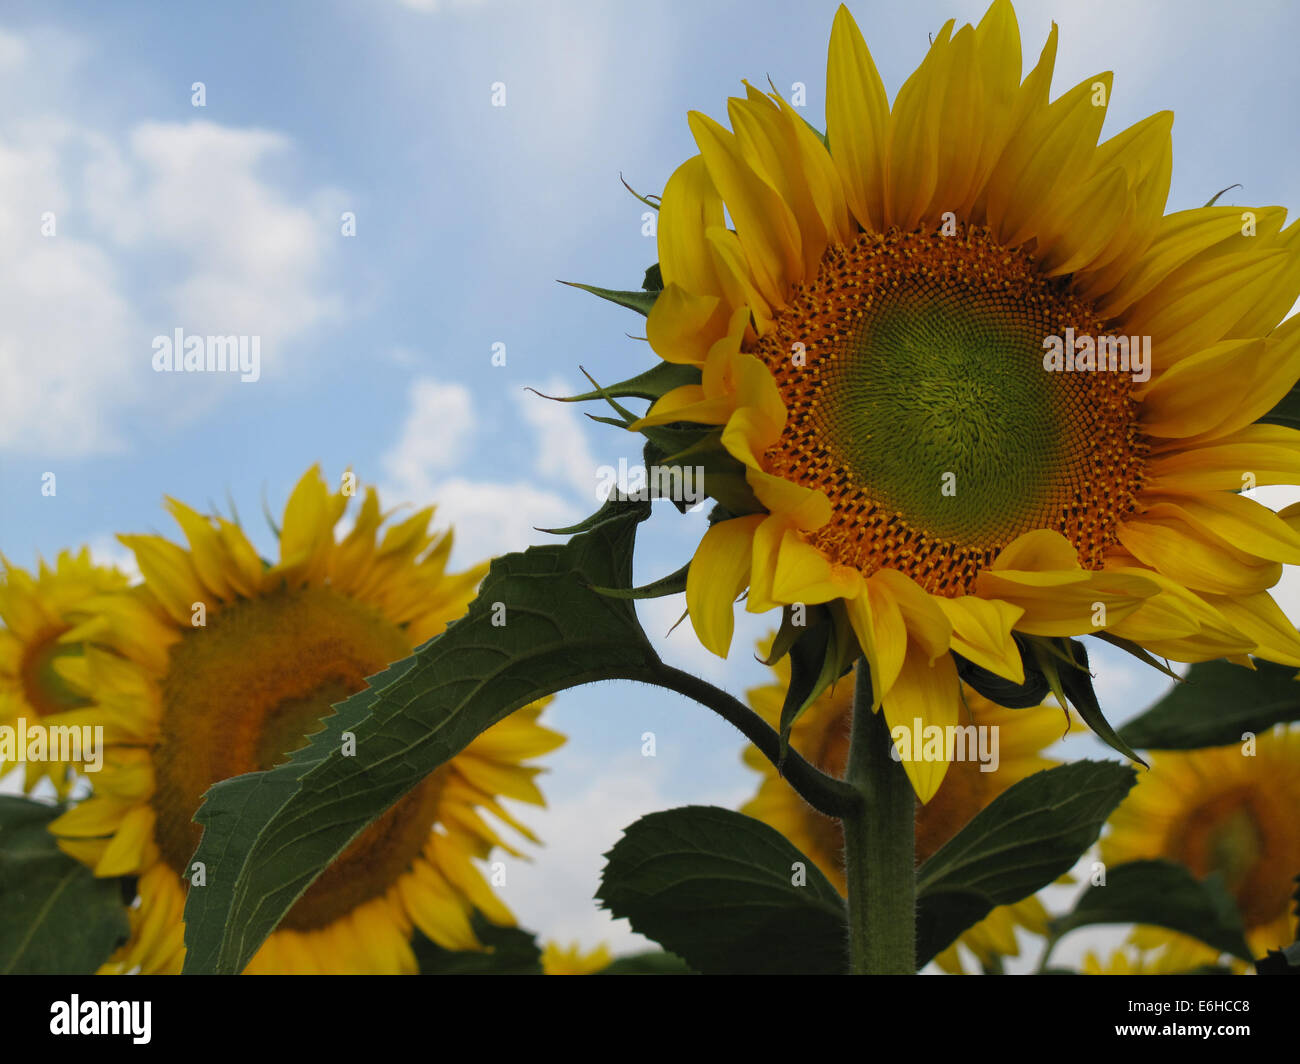 Close-up view of sunflowers Stock Photo